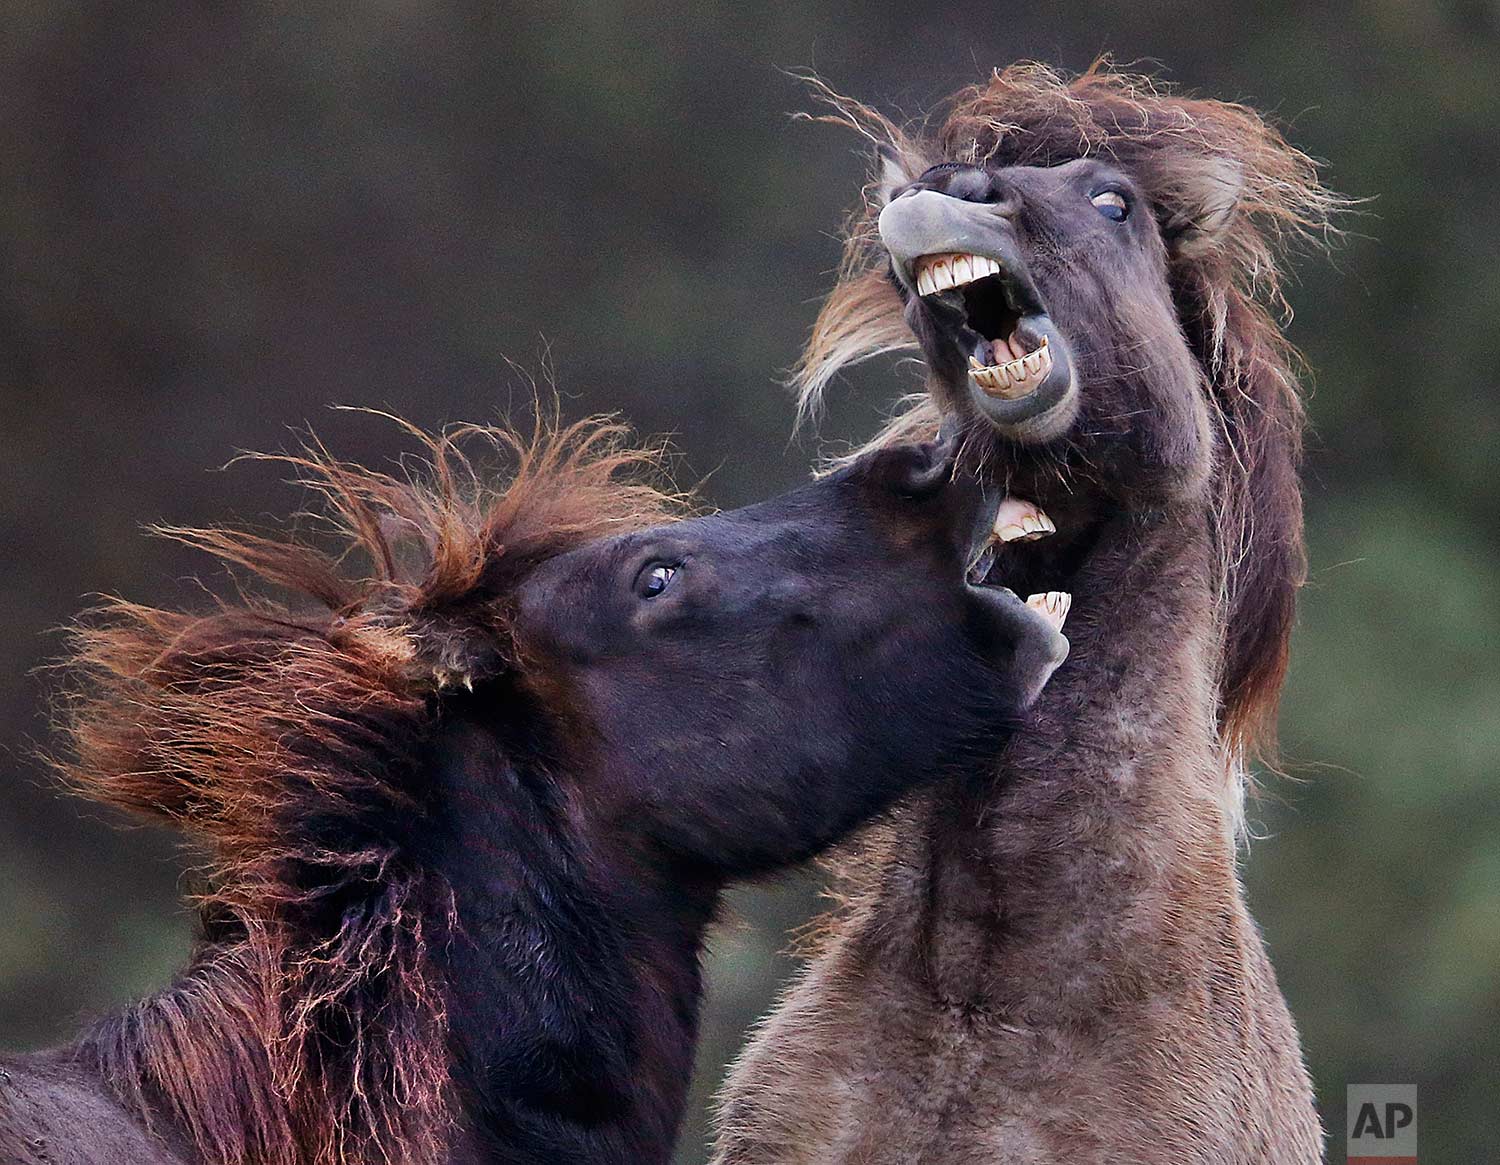  In this Thursday, Oct. 26, 2017 photo, two Icelandic horses play in their paddock in Wehrheim, near Frankfurt, Germany. (AP Photo/Michael Probst) 